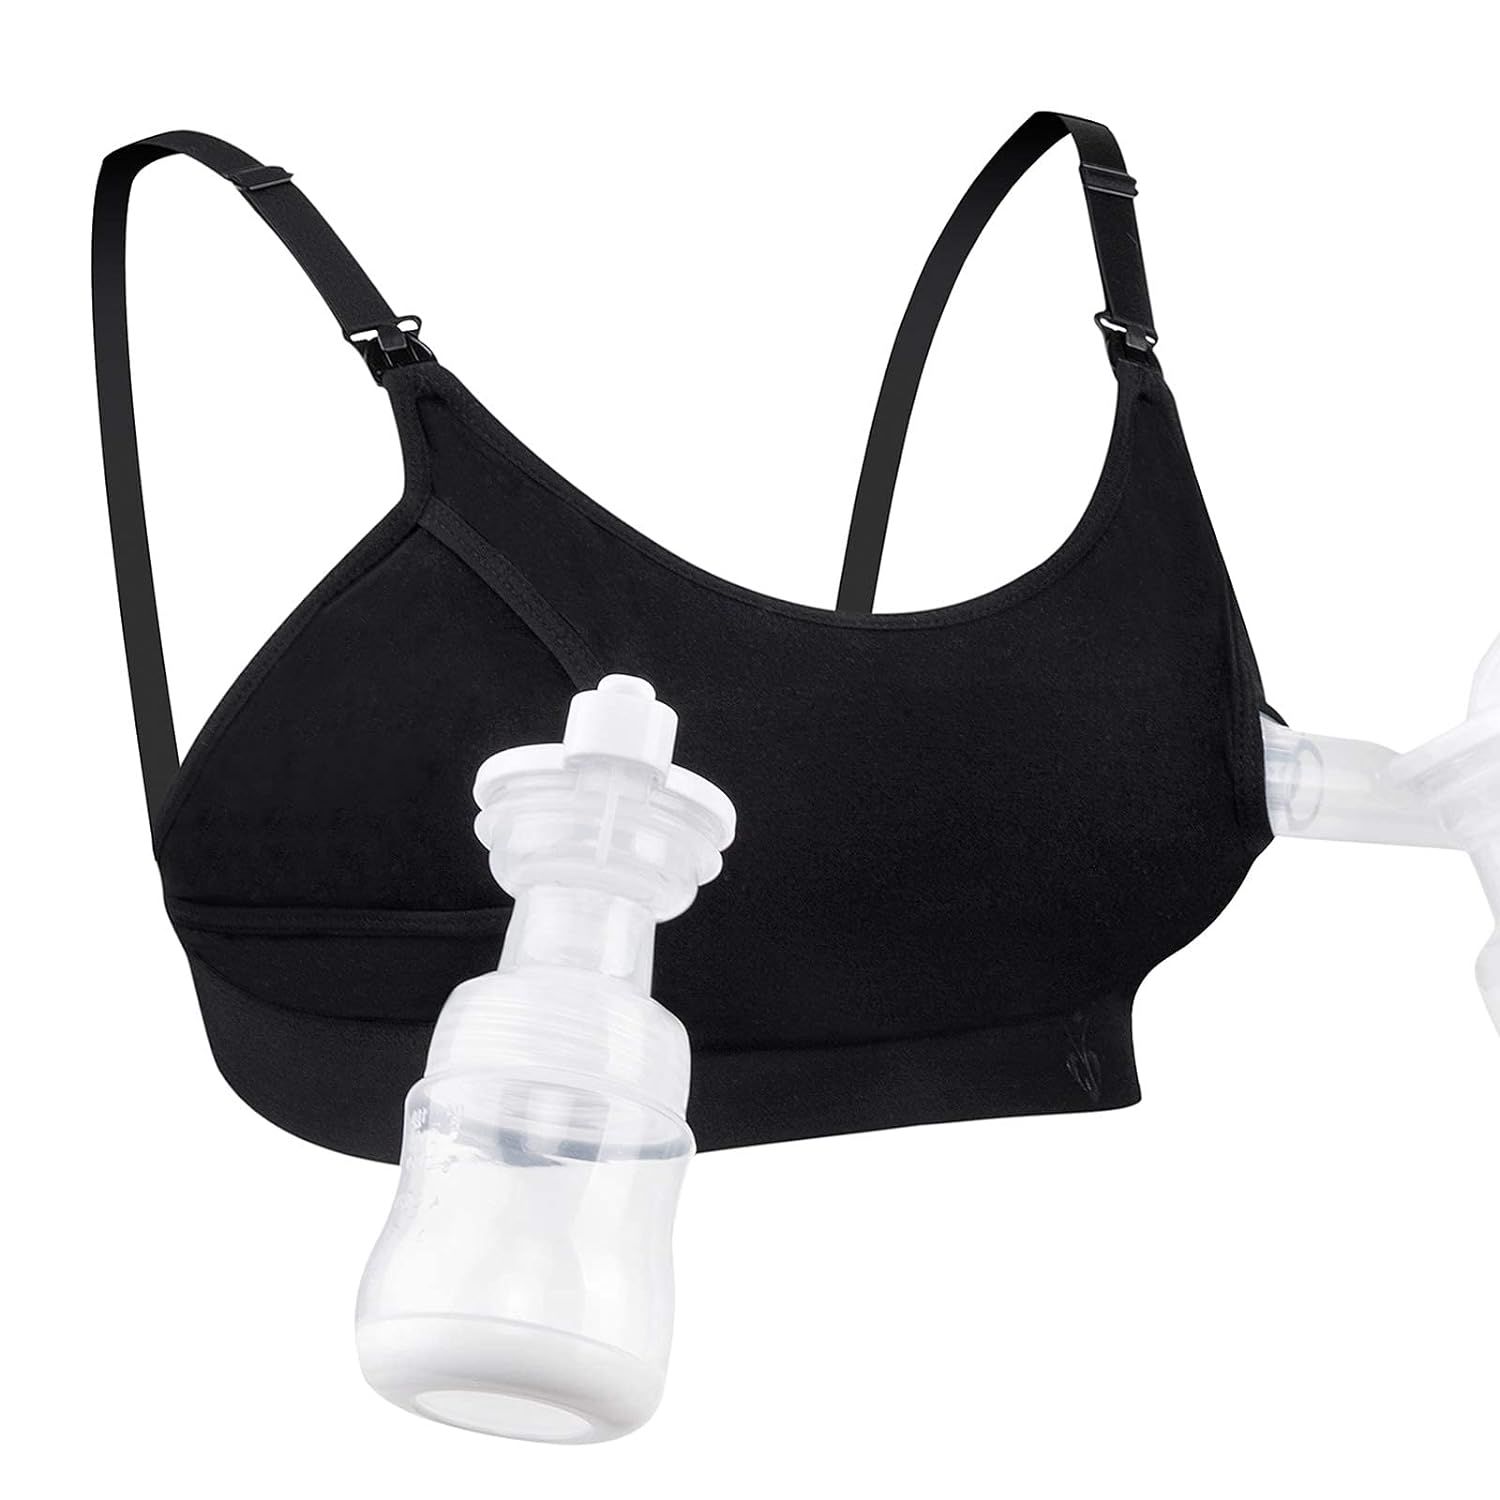 Hands Free Pumping Bra, Momcozy Adjustable Breast-Pumps Holding and Nursing Bra, Suitable for Bre... | Amazon (US)